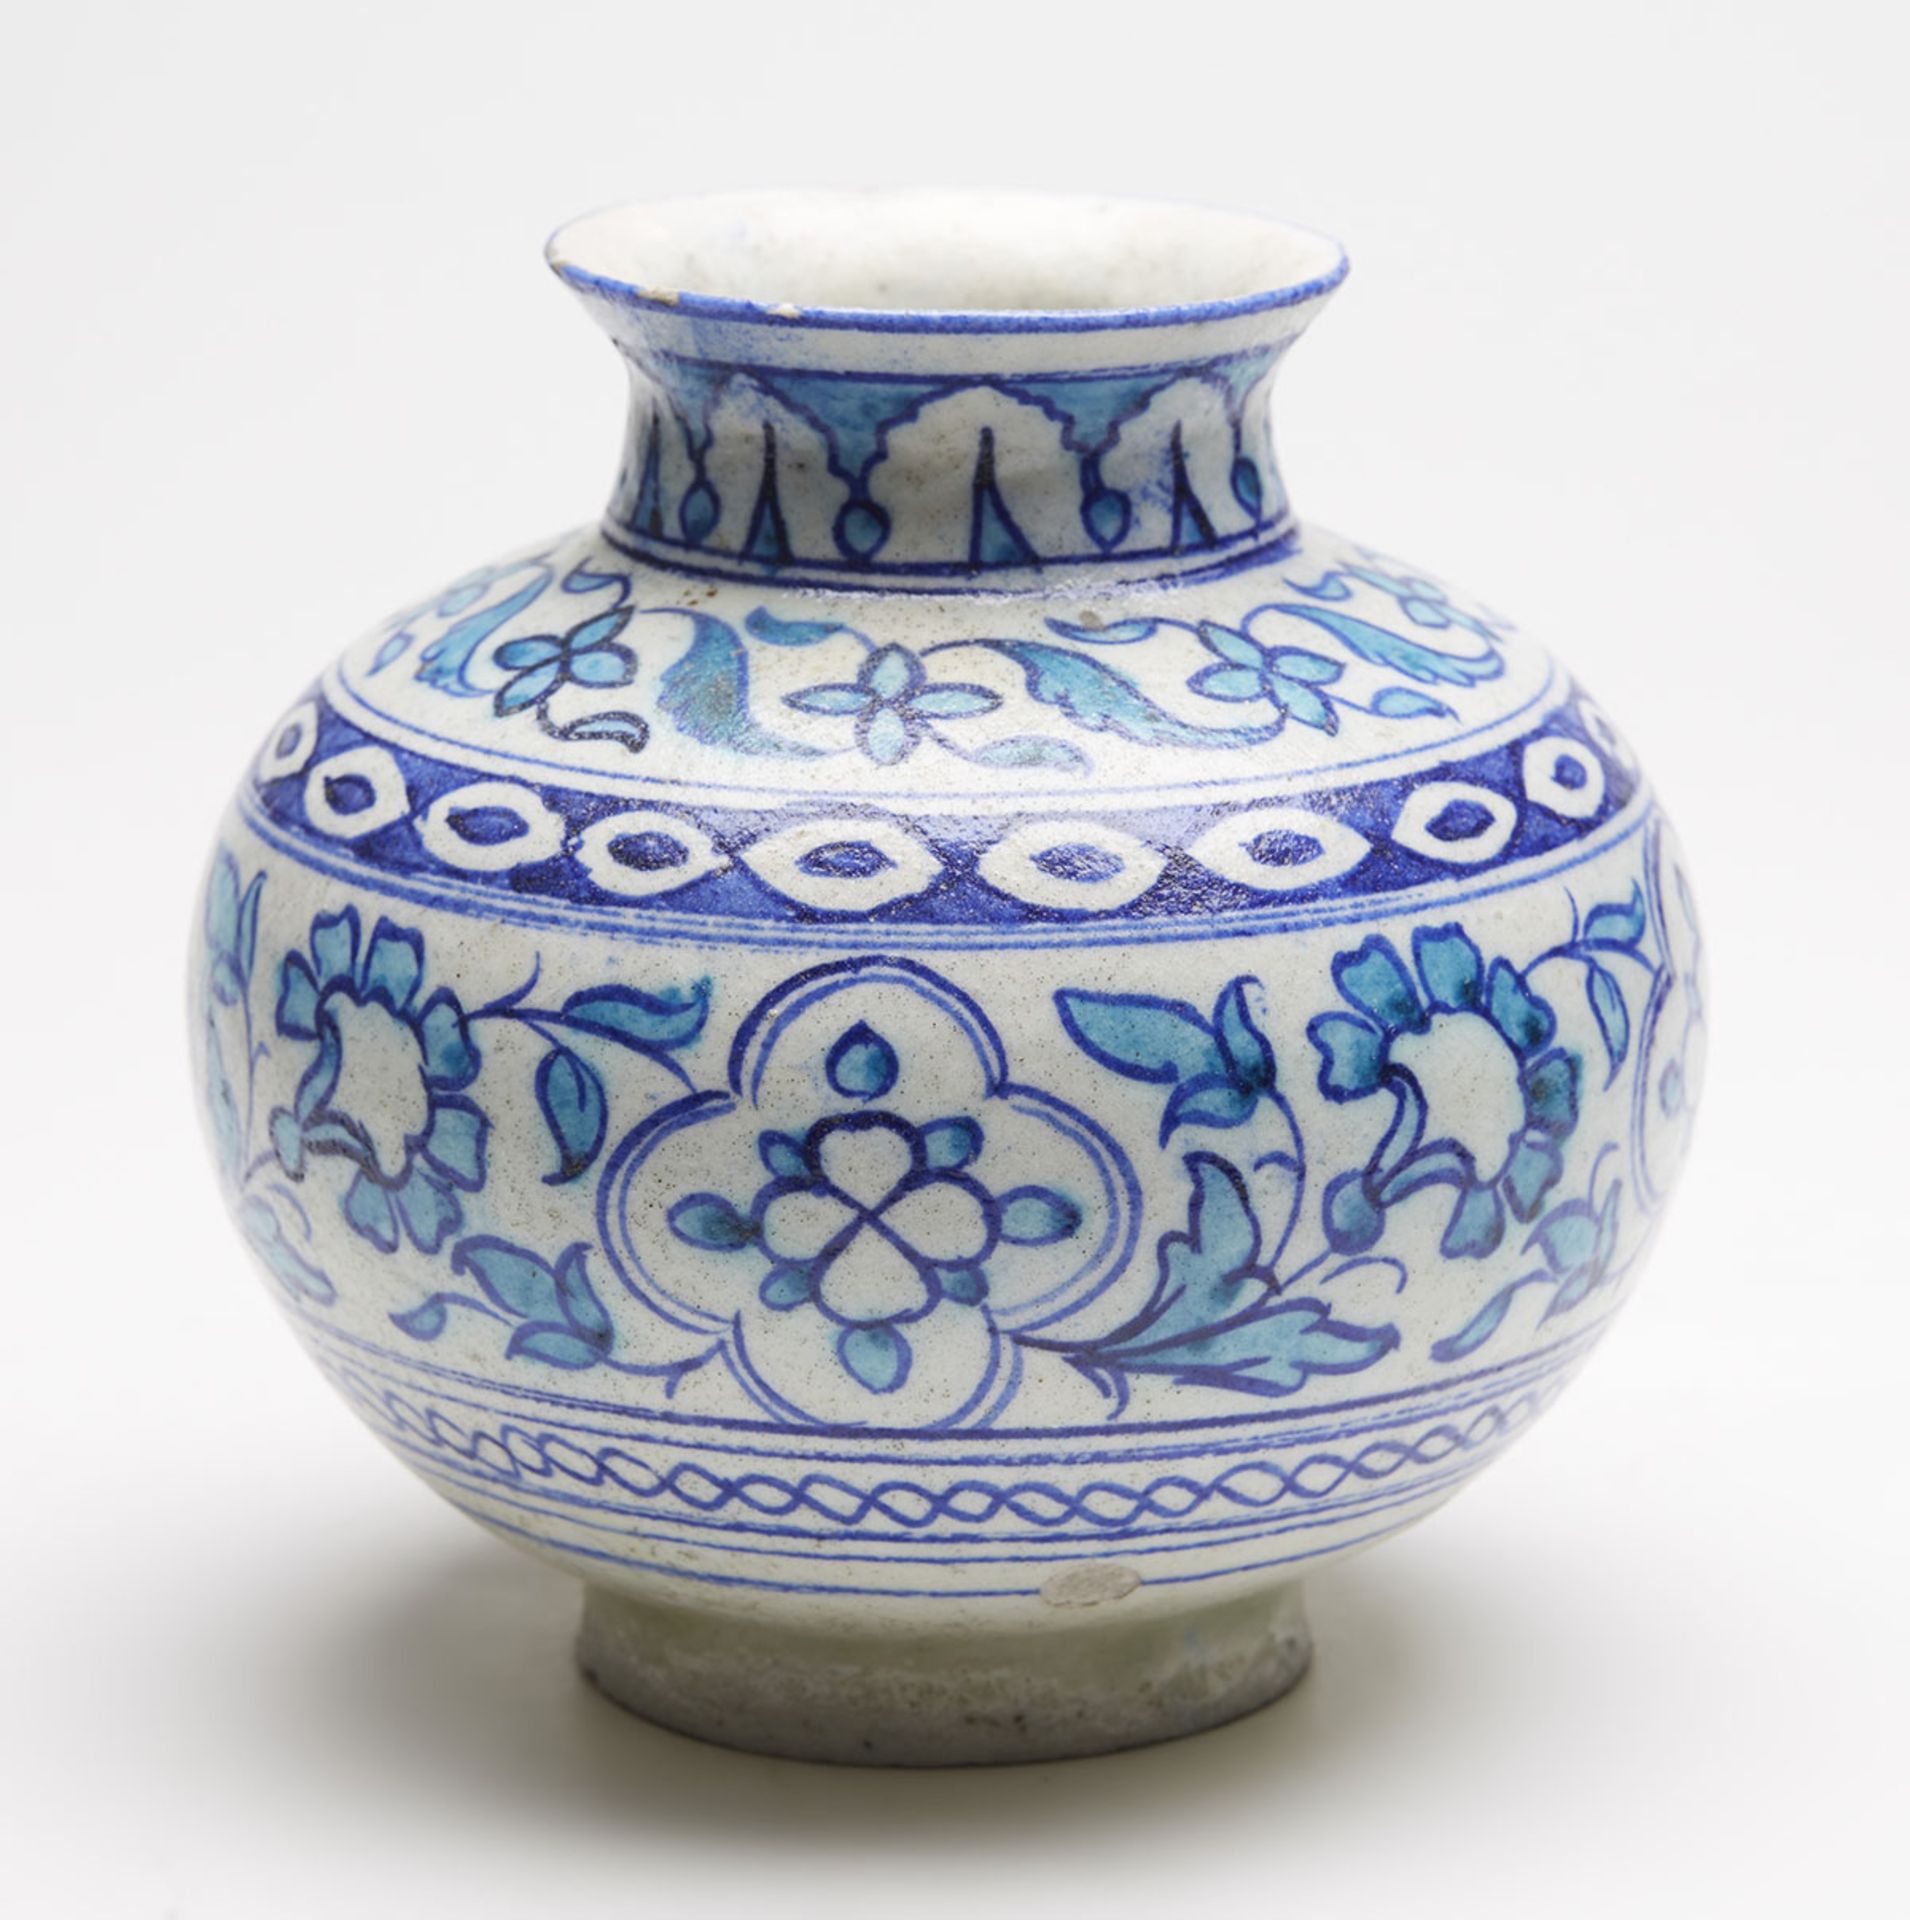 ANTIQUE MIDDLE EASTERN/INDIAN BLUE & WHITE VASE 19TH C.   DIMENSIONS   Height 13,5cm, Diameter 14, - Image 7 of 9